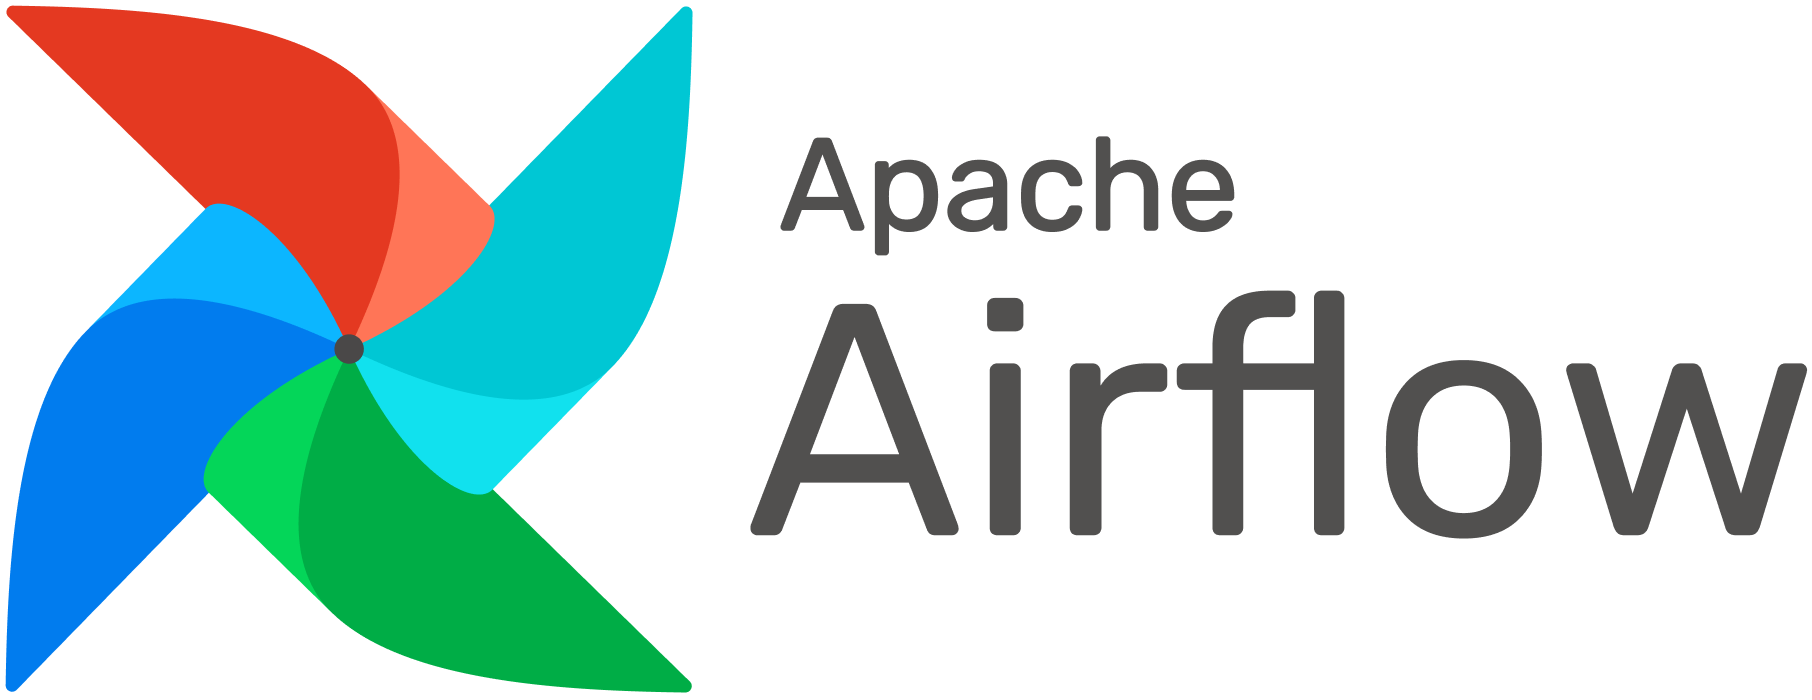 Apache Airflow | Model Deployment and Serving Tools